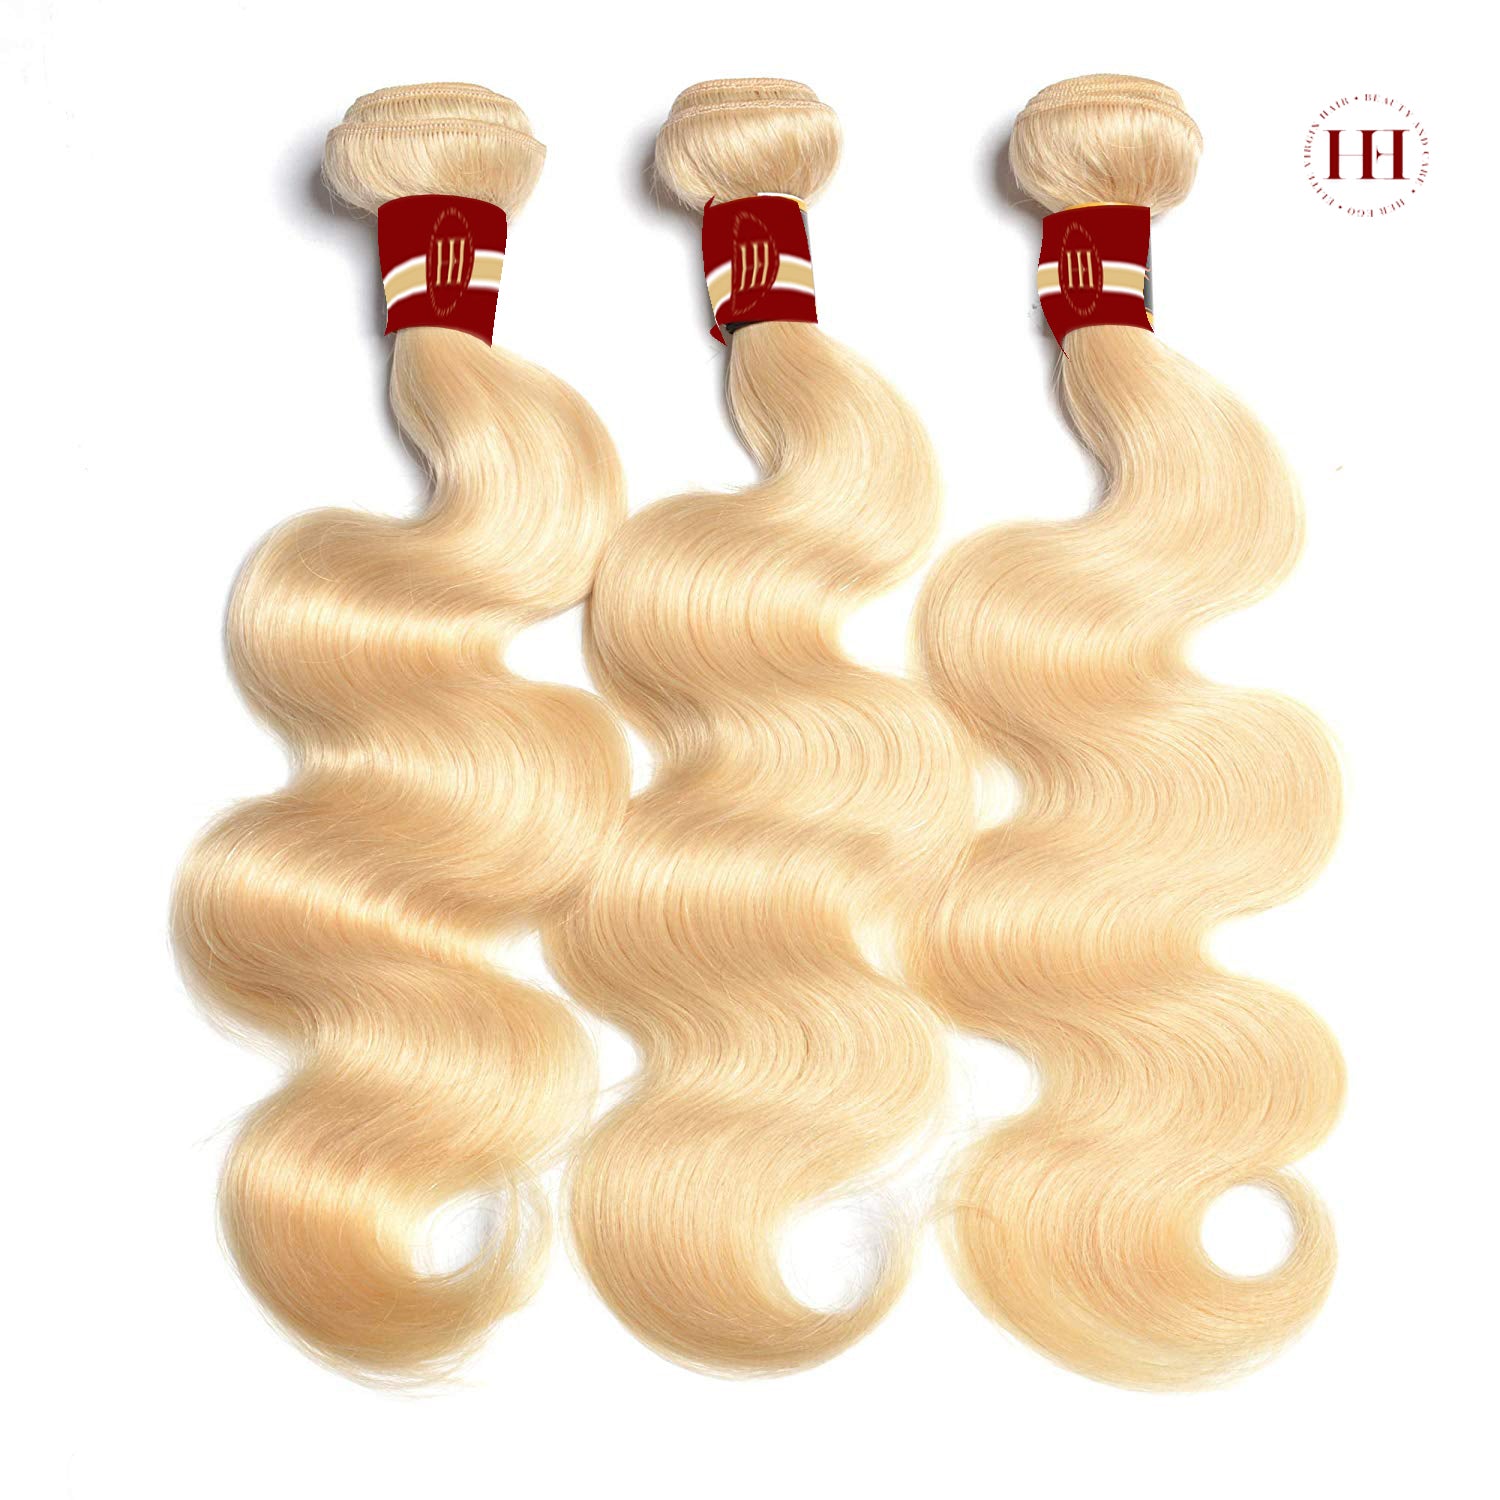 Blonde Obsession Body Wave Bundle - Her Ego Hair Collection